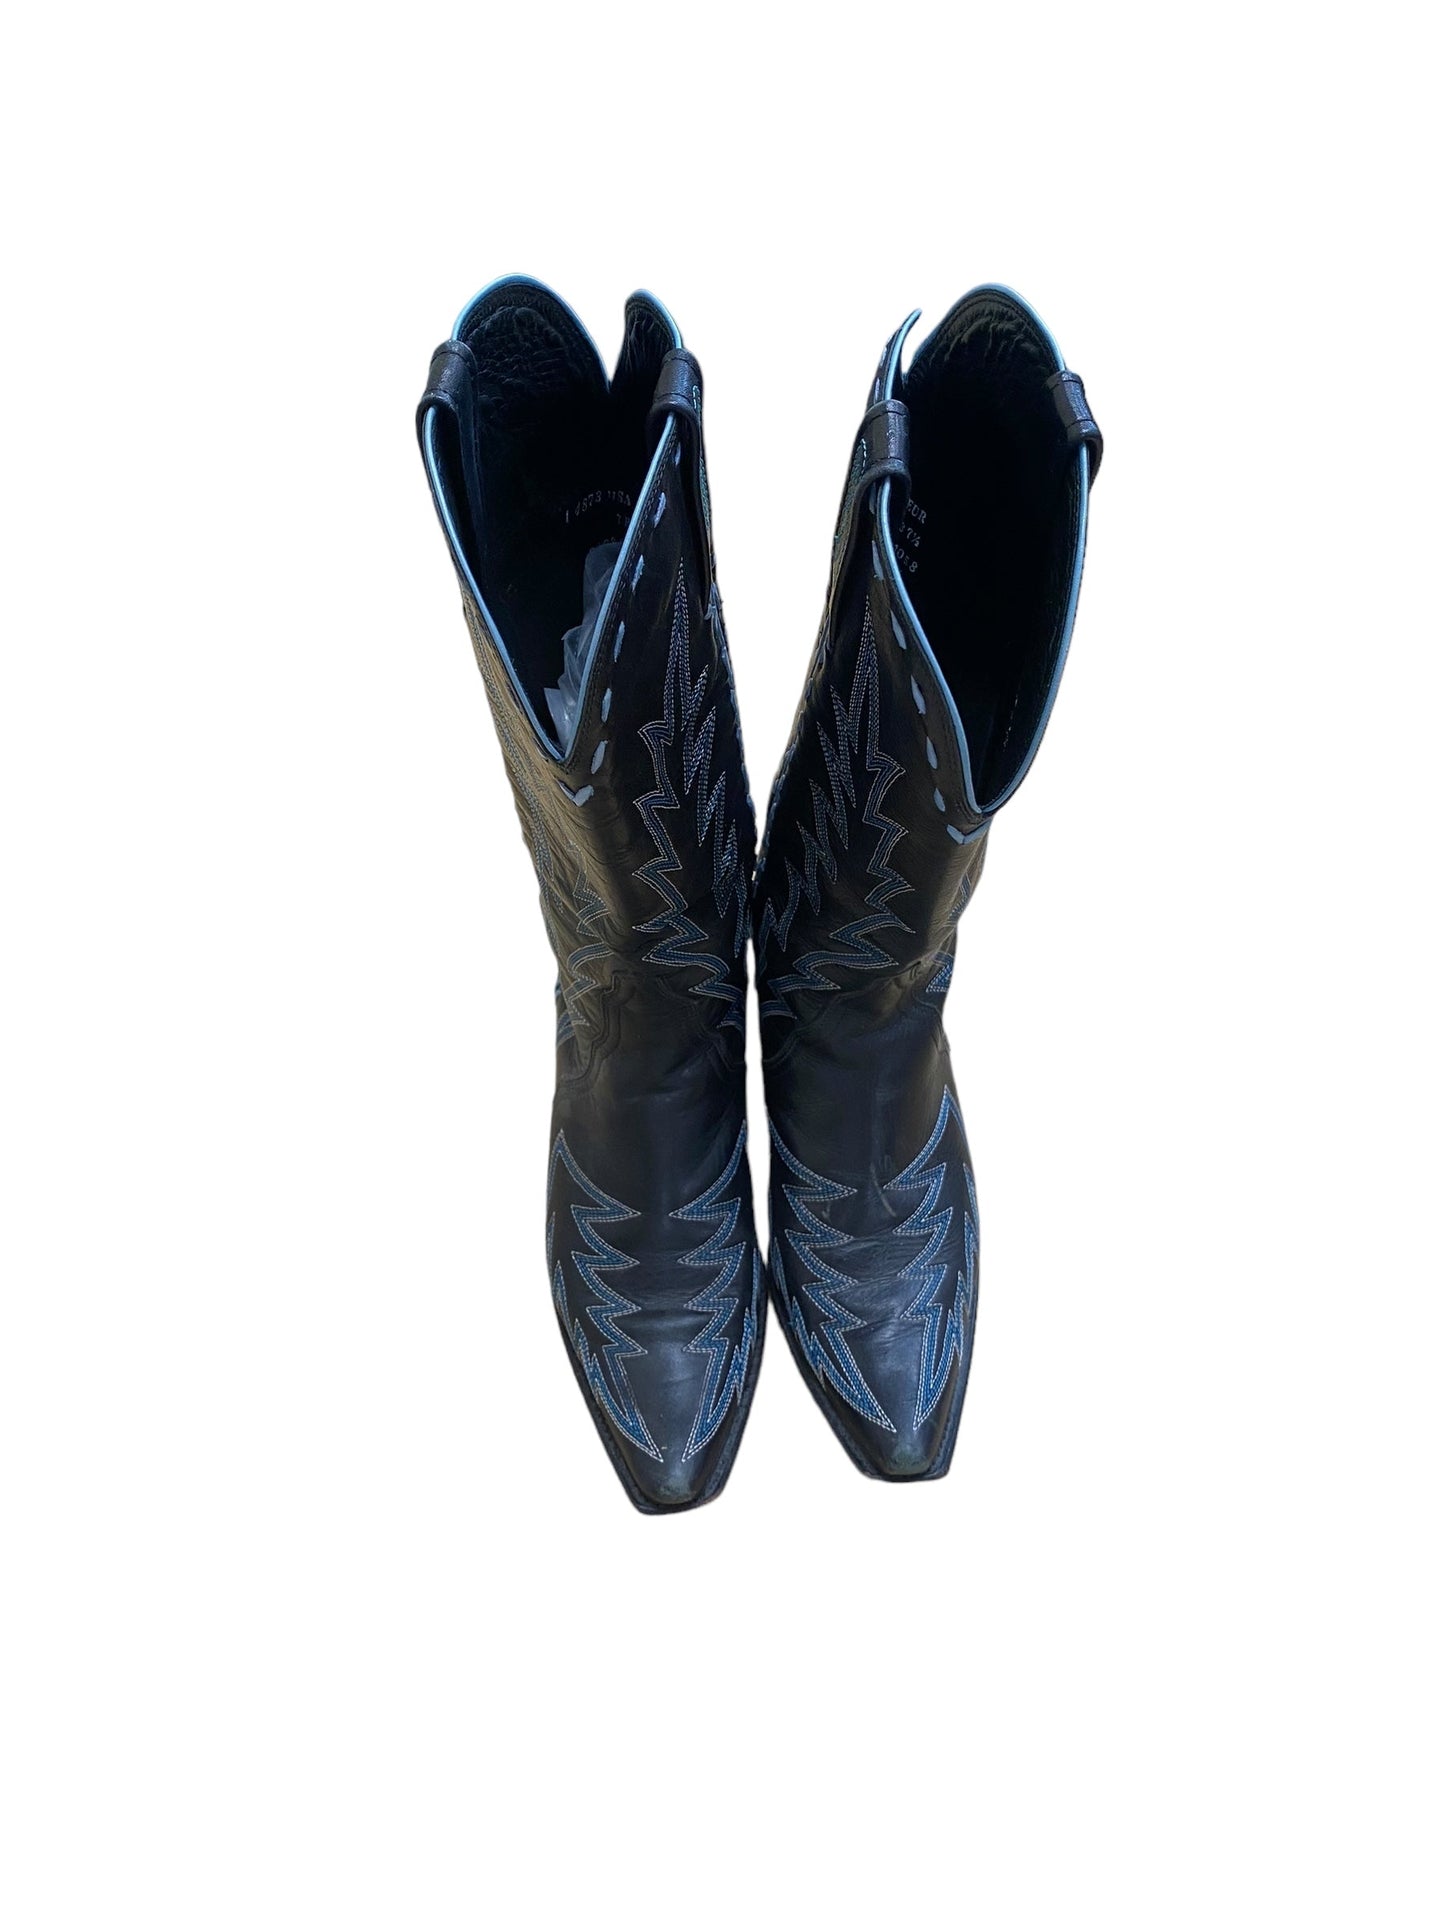 Black & Blue Boots Western Clothes Mentor, Size 7